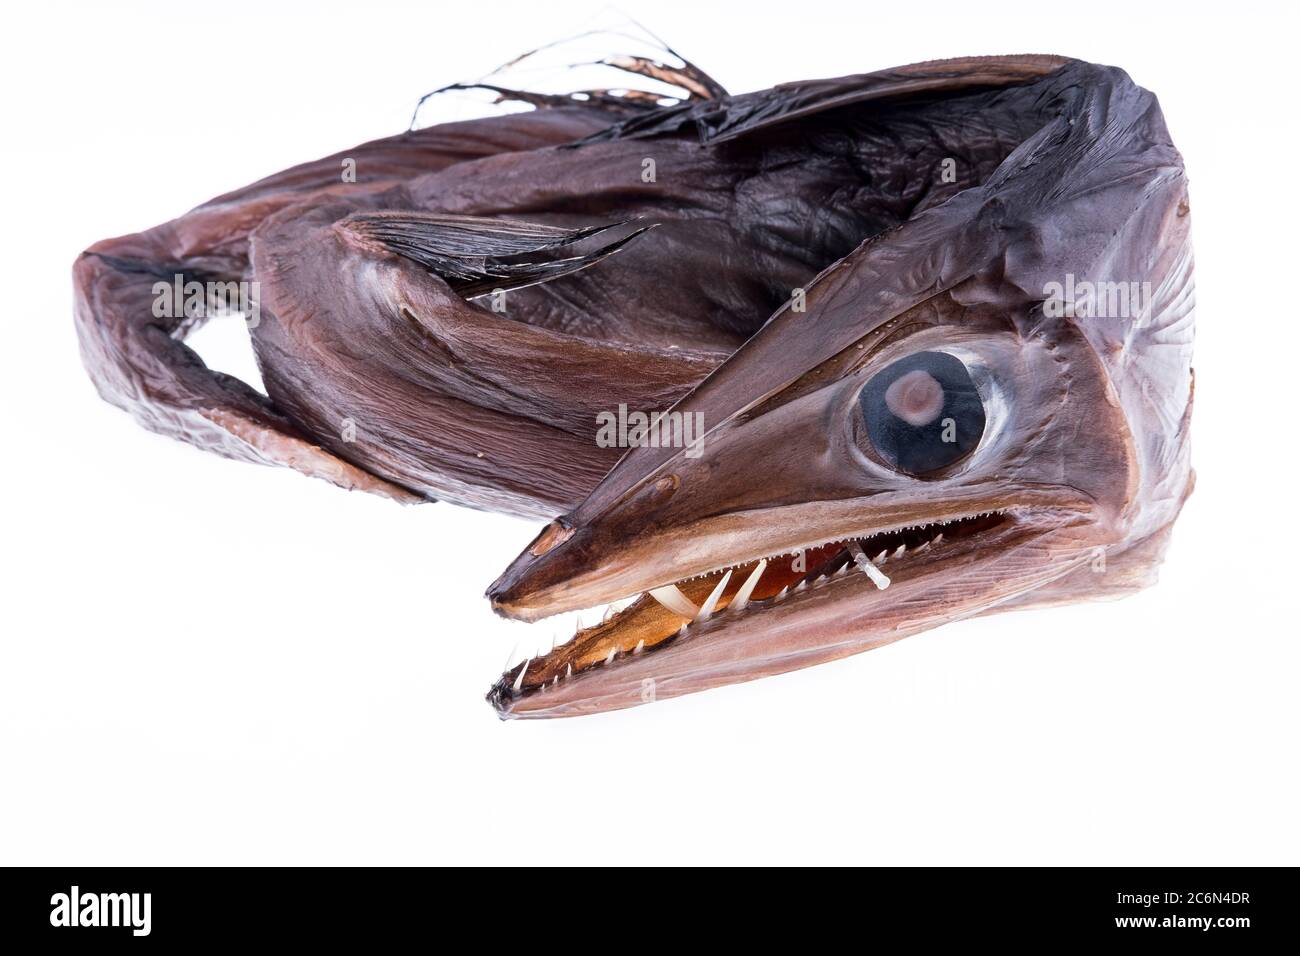 From the collection of the Spanish Institute of Oceanography of Malaga, Spain. Stock Photo